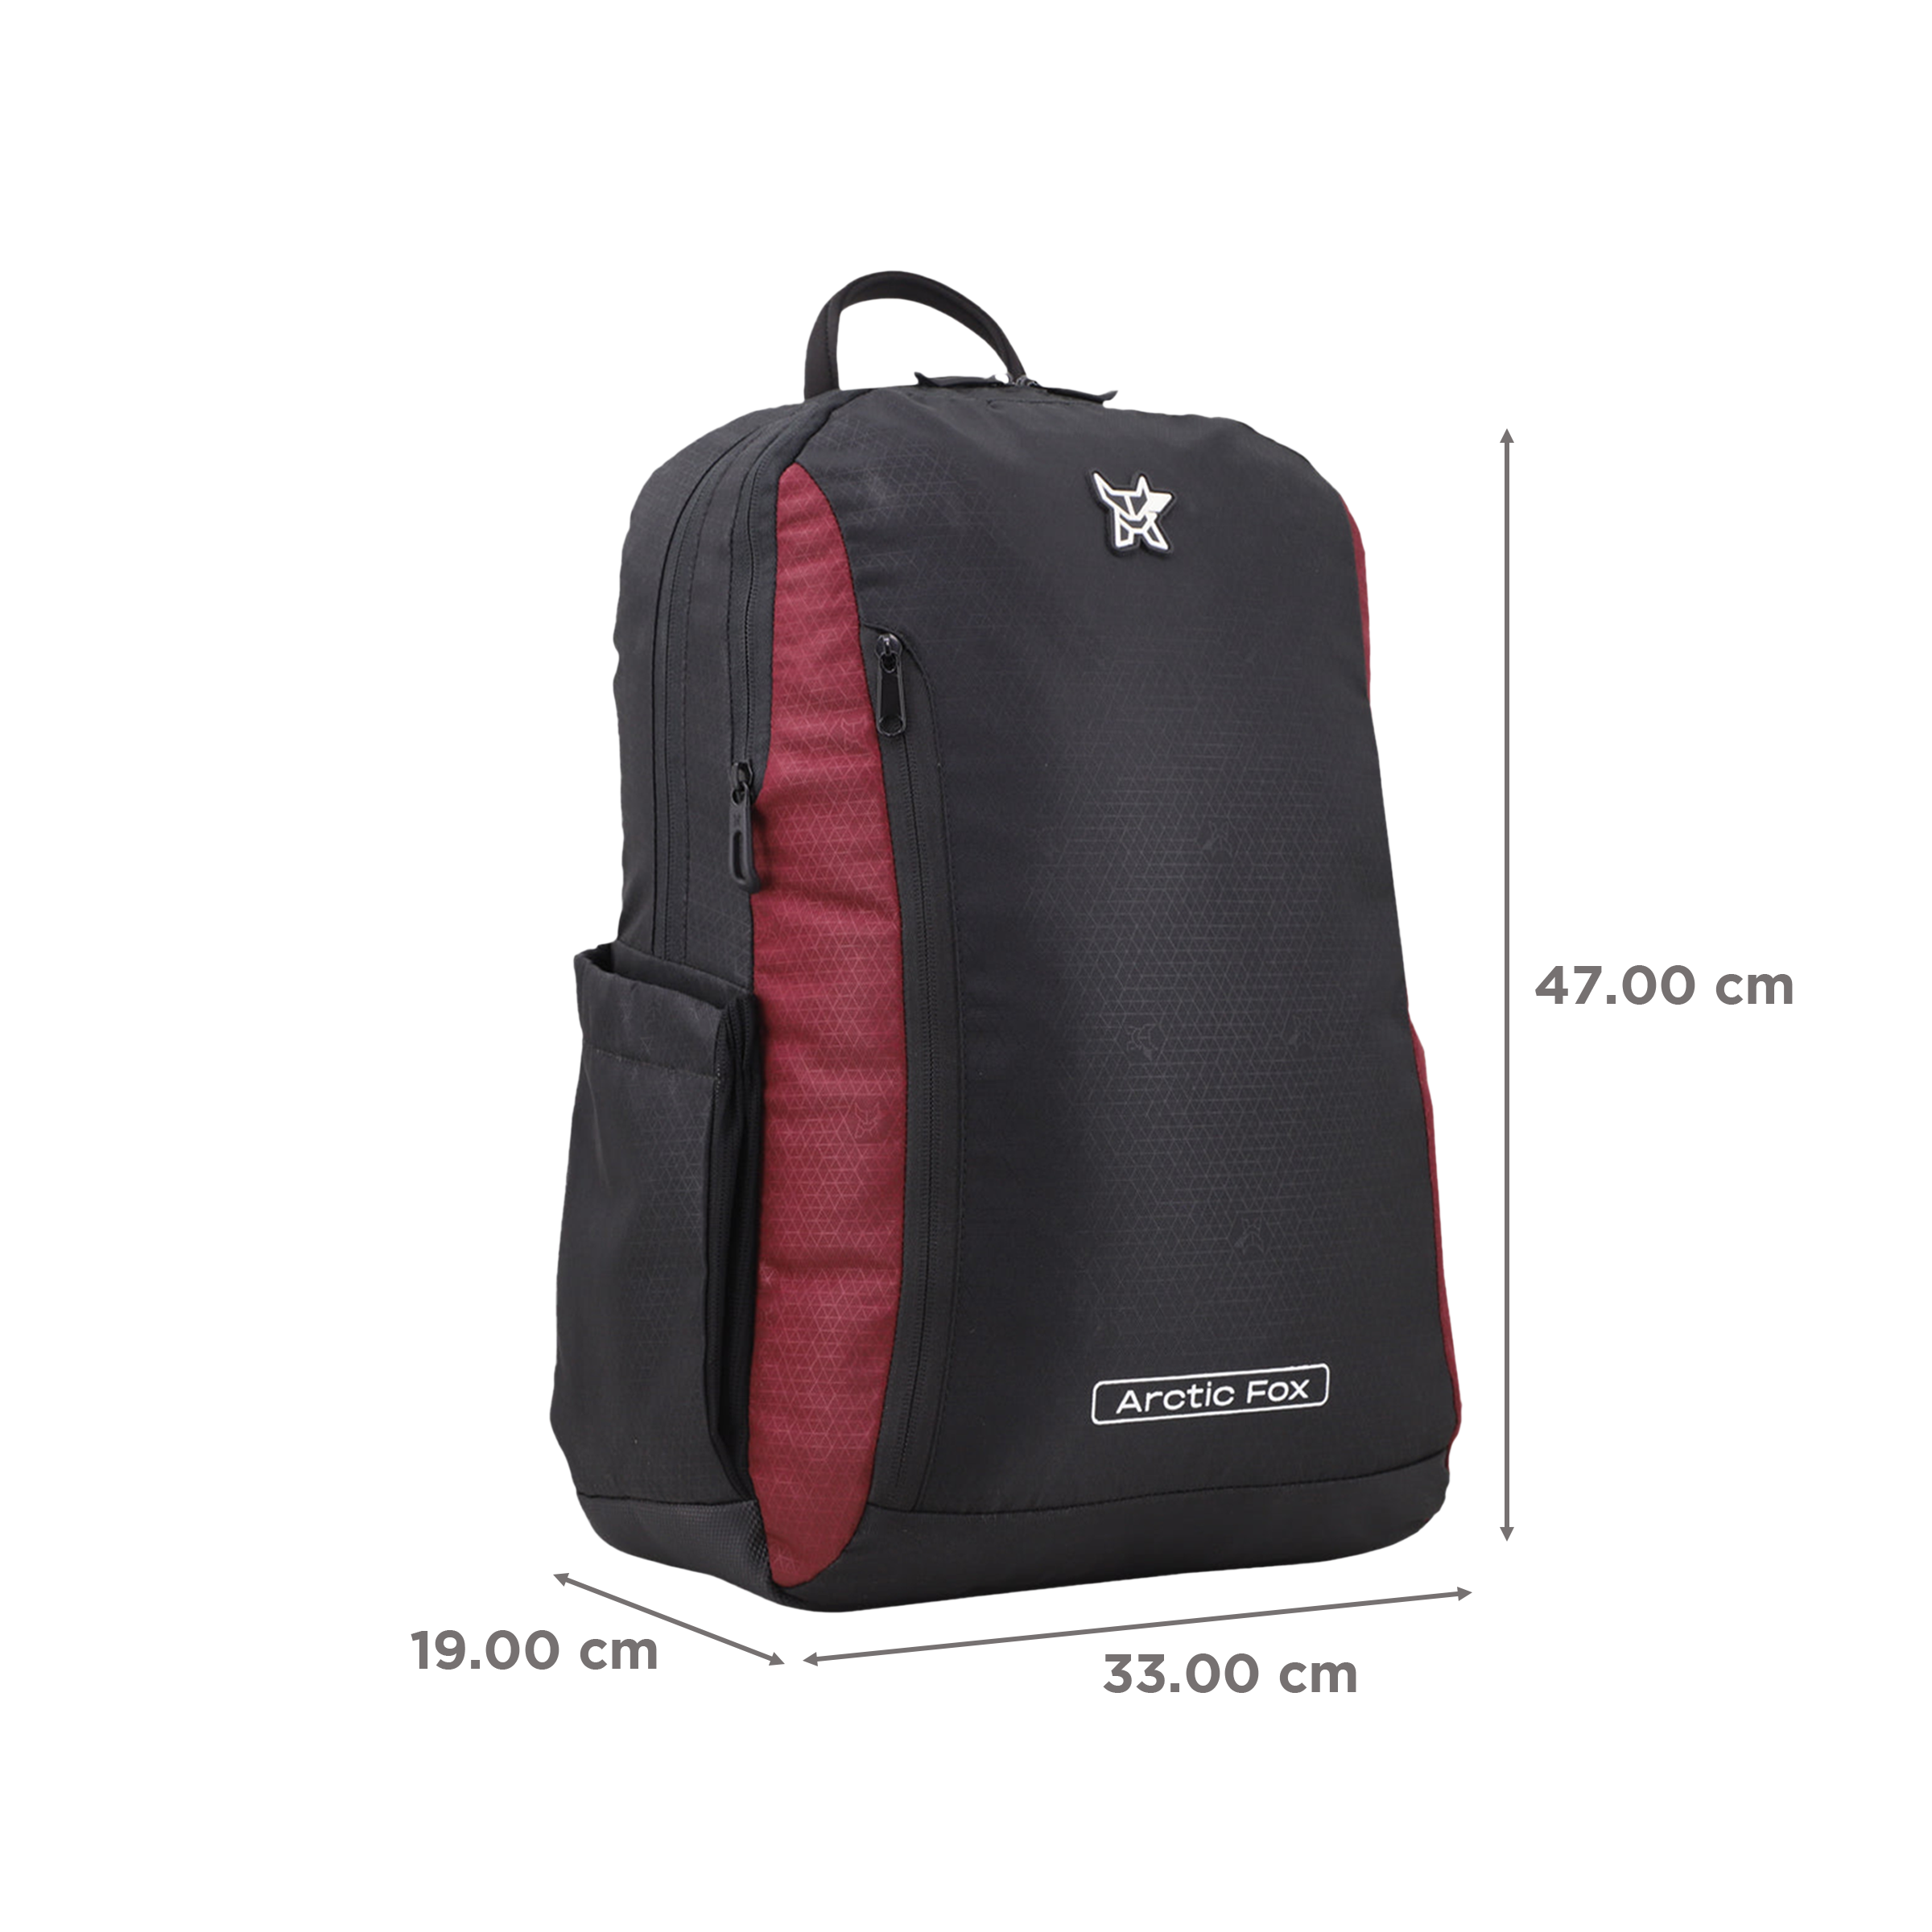 Buy Outshiny Sany 2 Black 3ST Backpack at Amazon.in